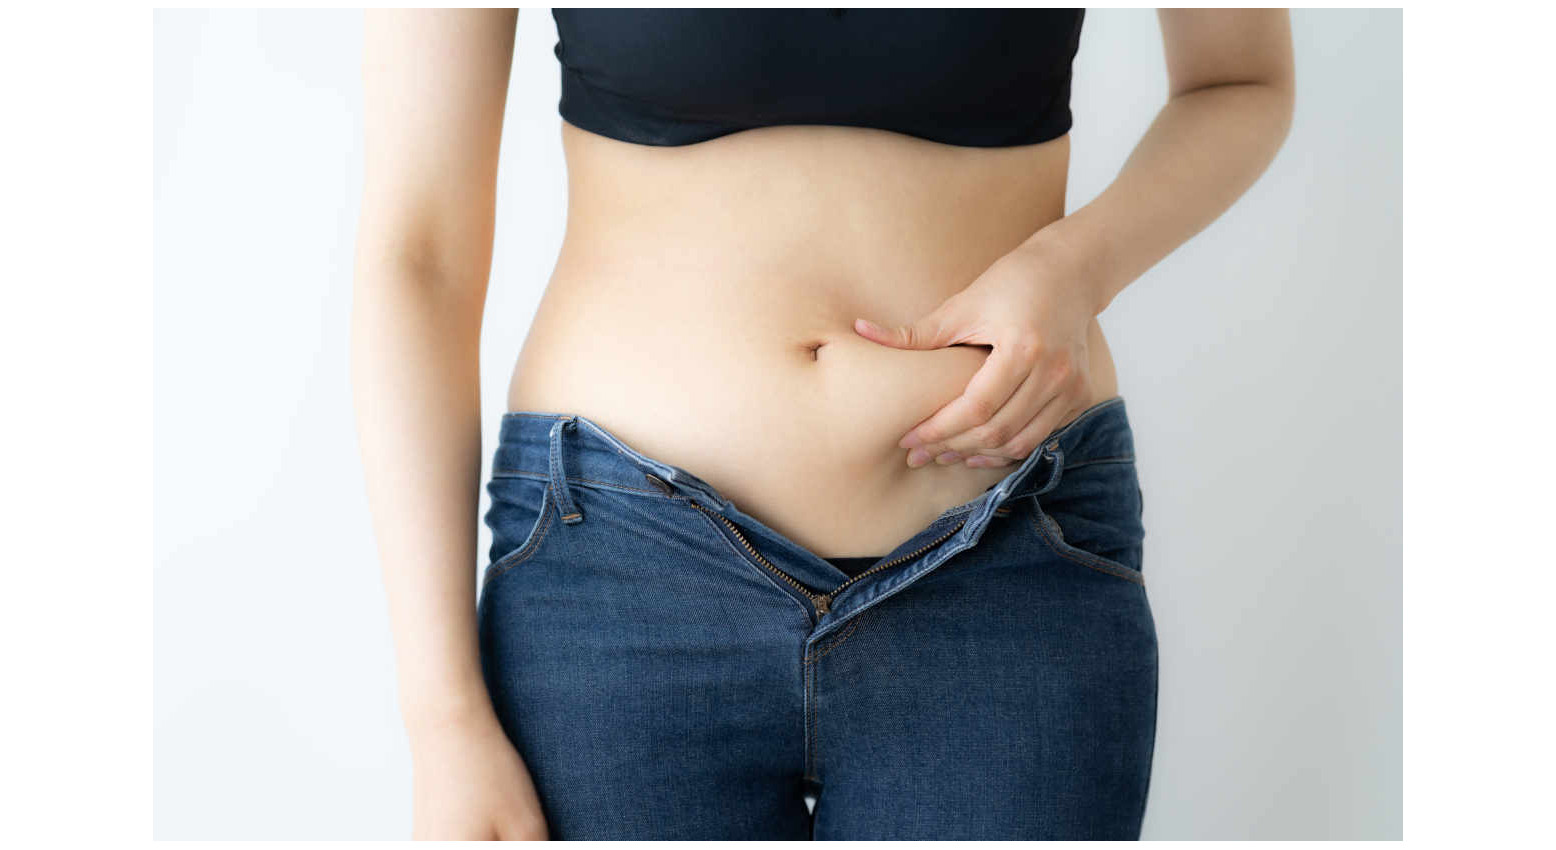 Discover the potential risks associated with abdominal fat accumulation - Gruppo Pesisti provides insights and guidance on the dangers of developing excess belly fat.